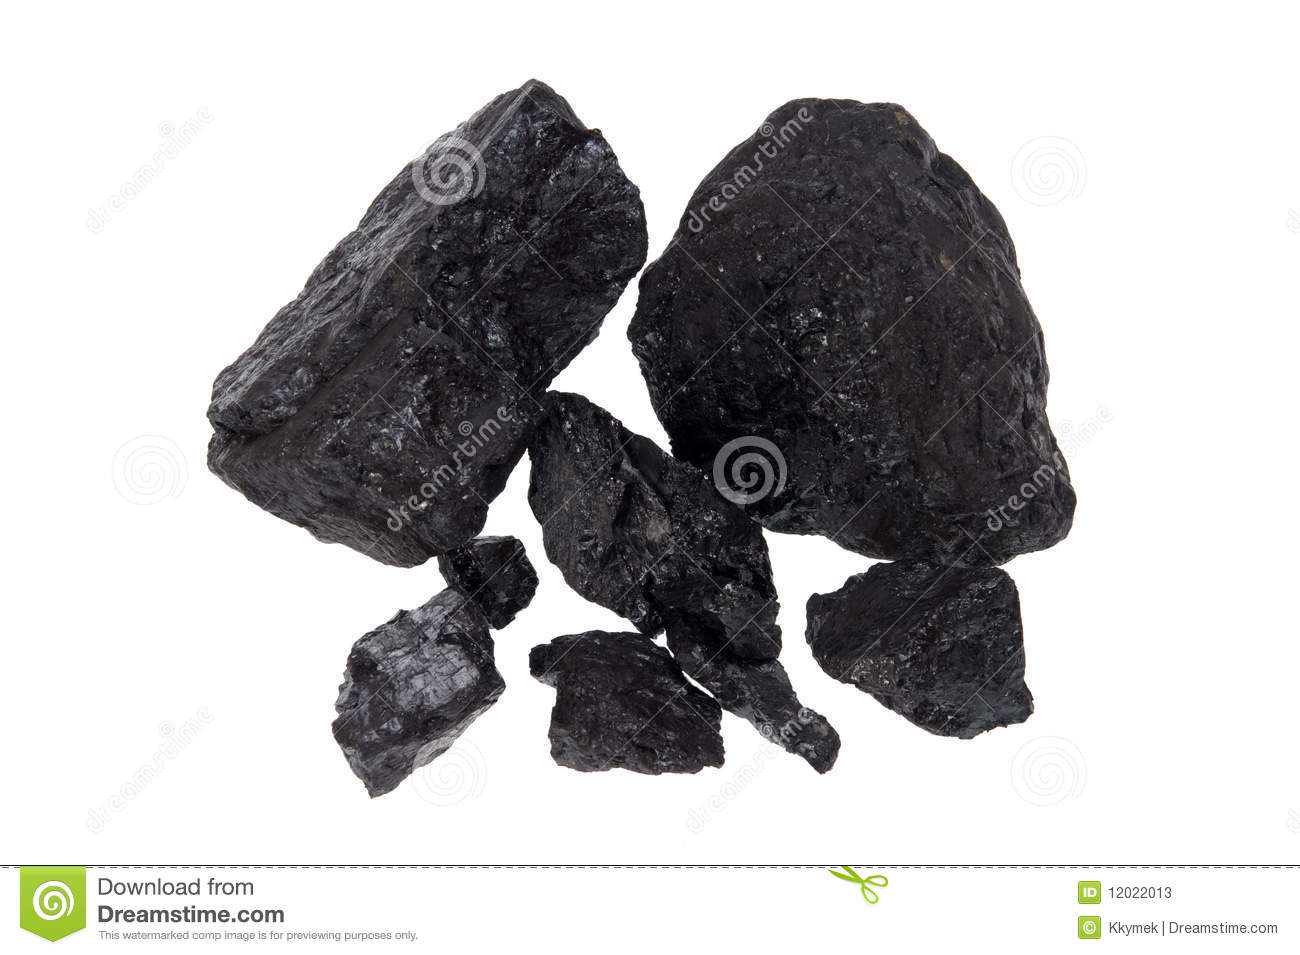 Isolated Coal Carbon Nuggets Stock Photos   Image  12022013